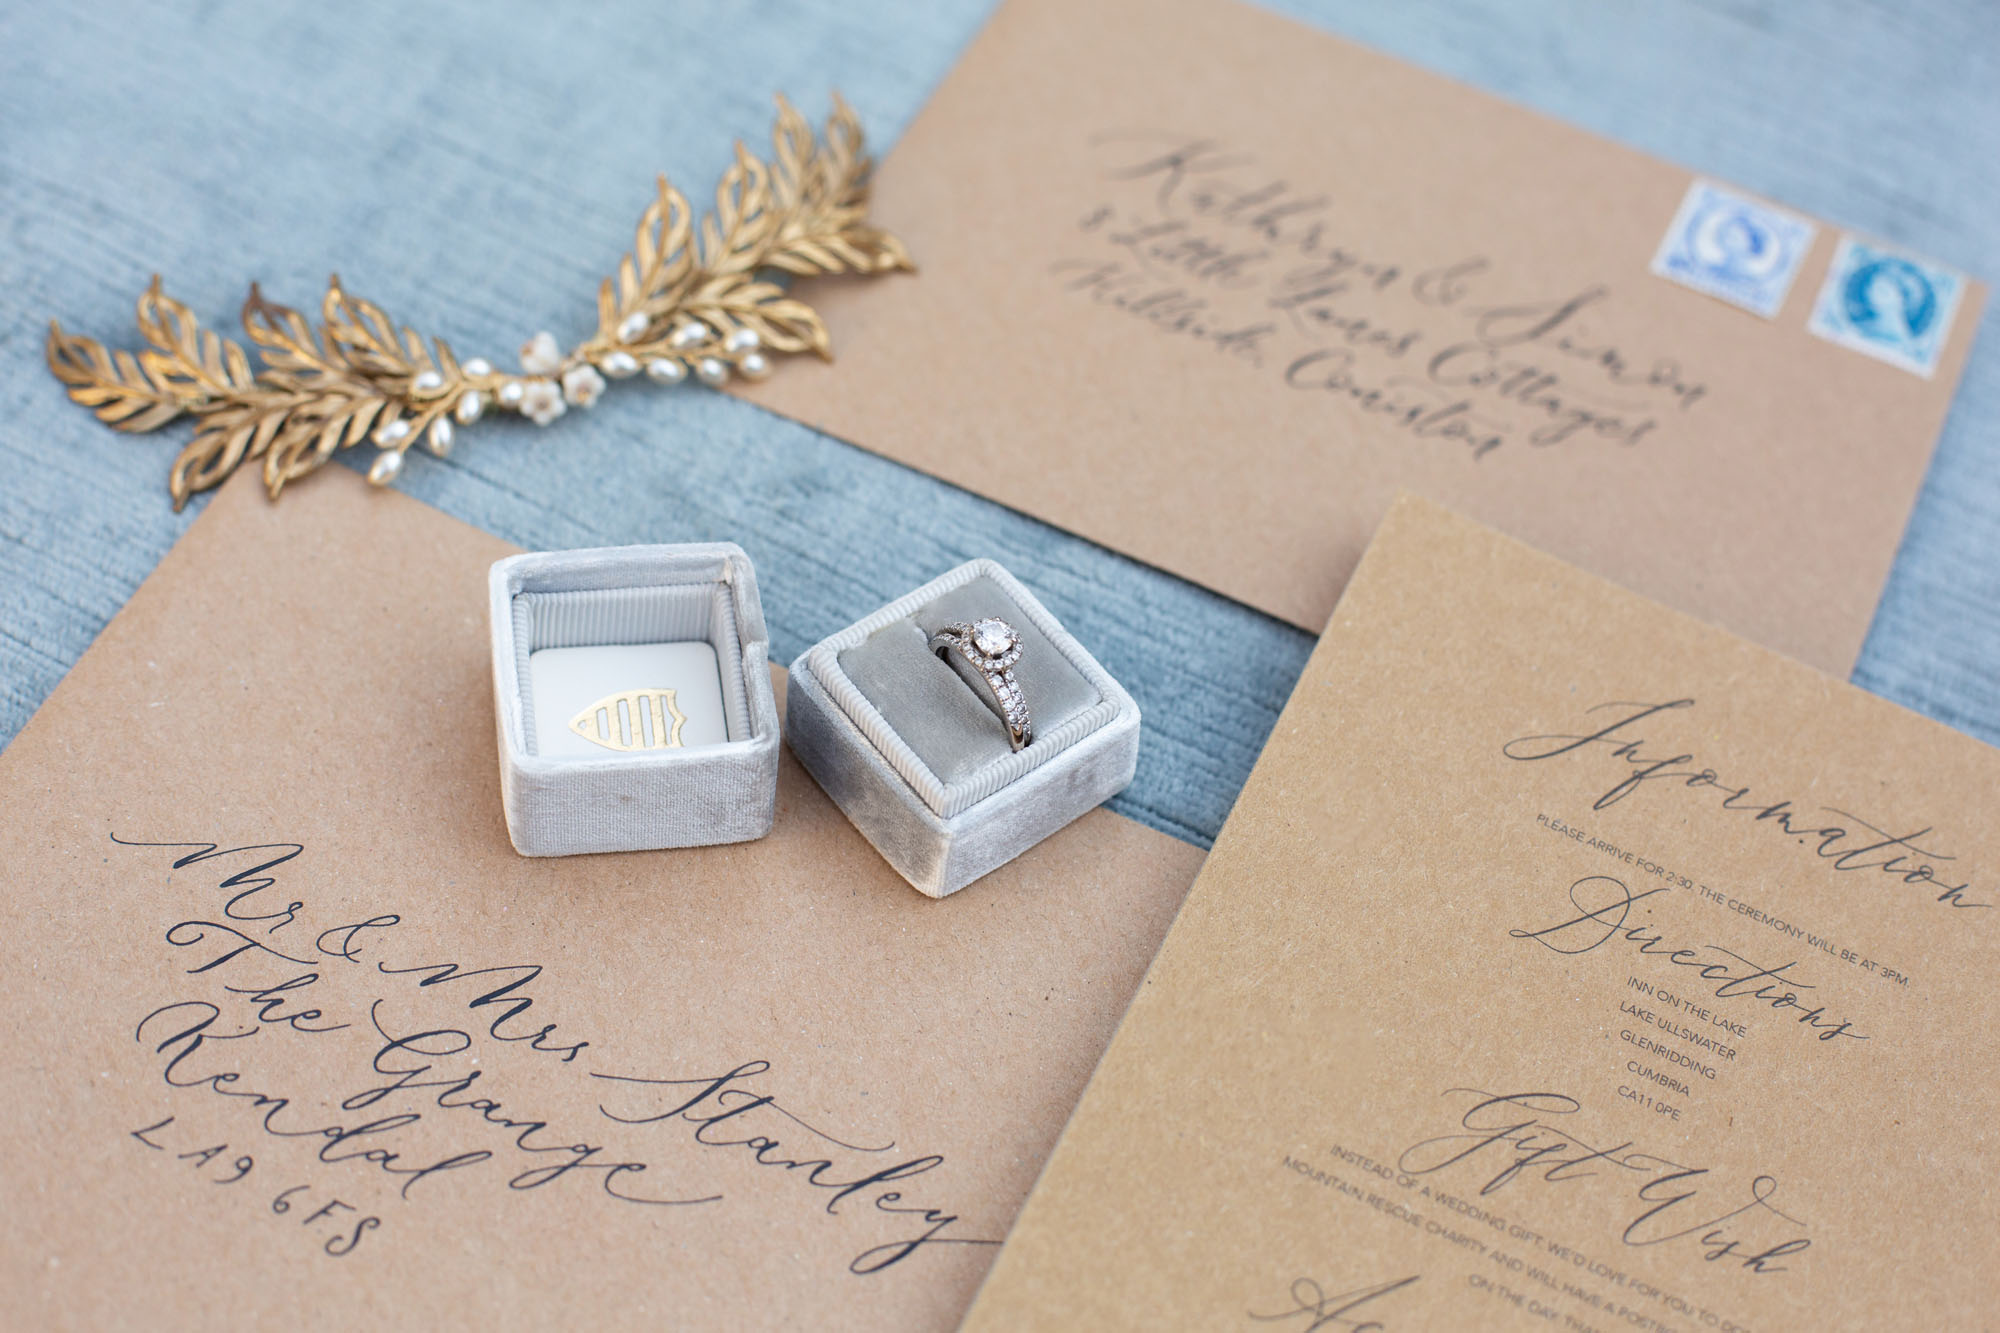 An open wedding ring box with a halo diamond ring sits on a calligraphy envelope with a gold hair accessory to one side. By Jessica Reeve Photography